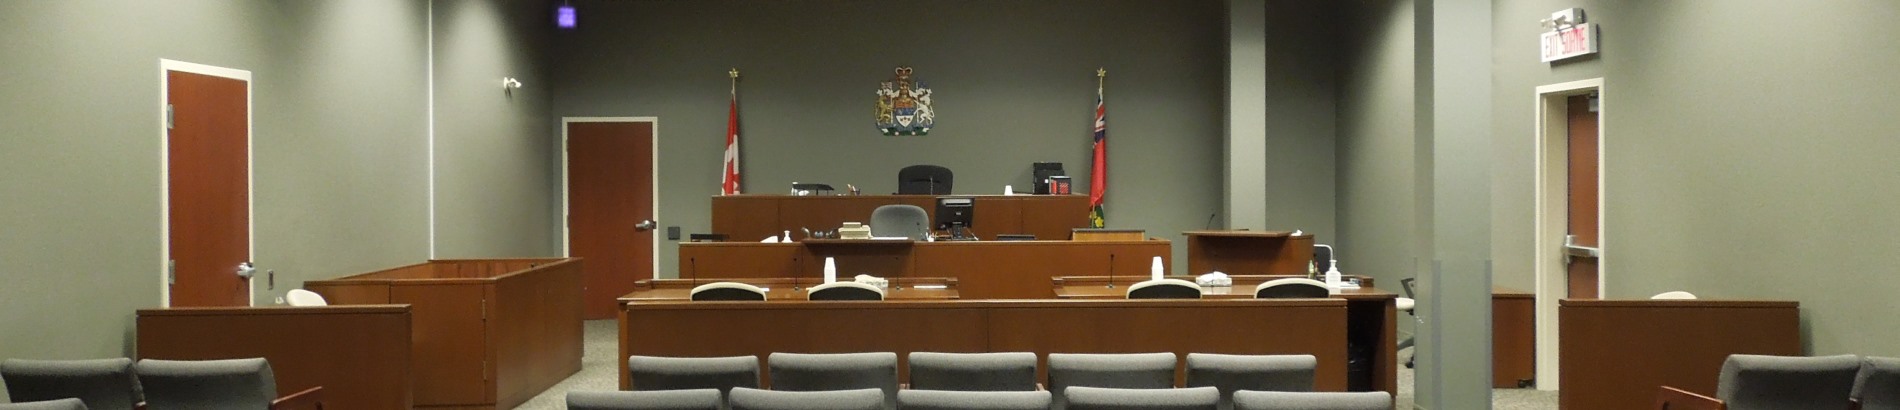 POA Court at Lambton Shared Services